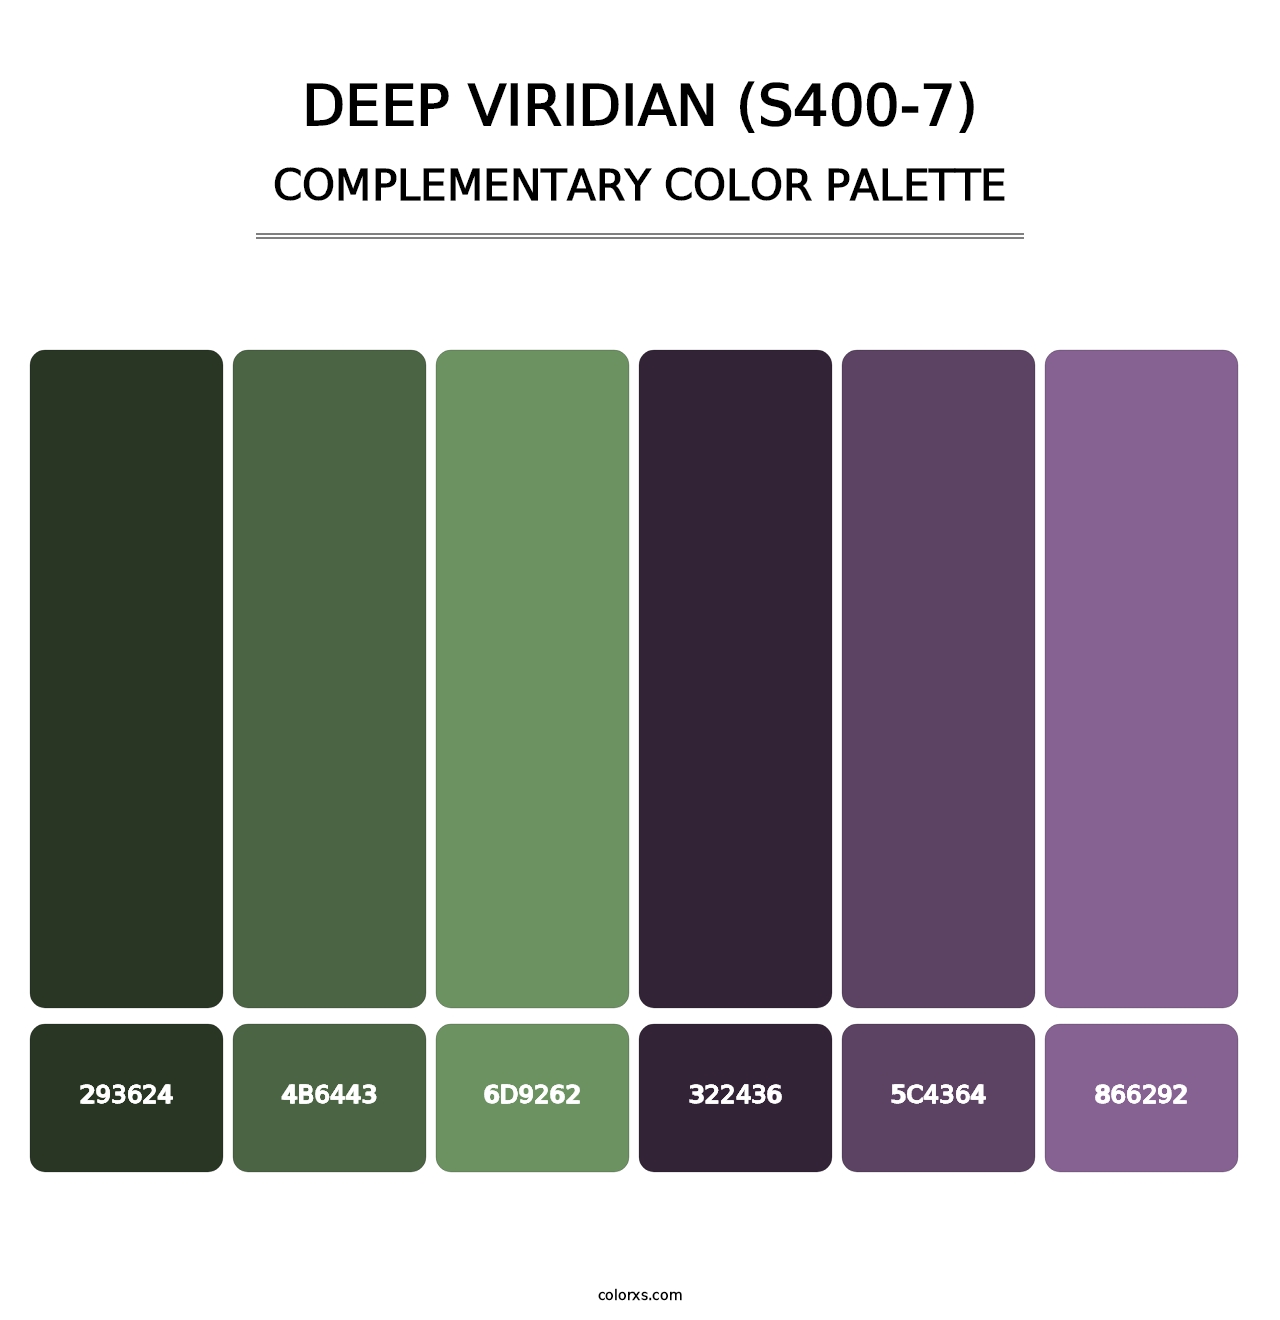 Deep Viridian (S400-7) - Complementary Color Palette